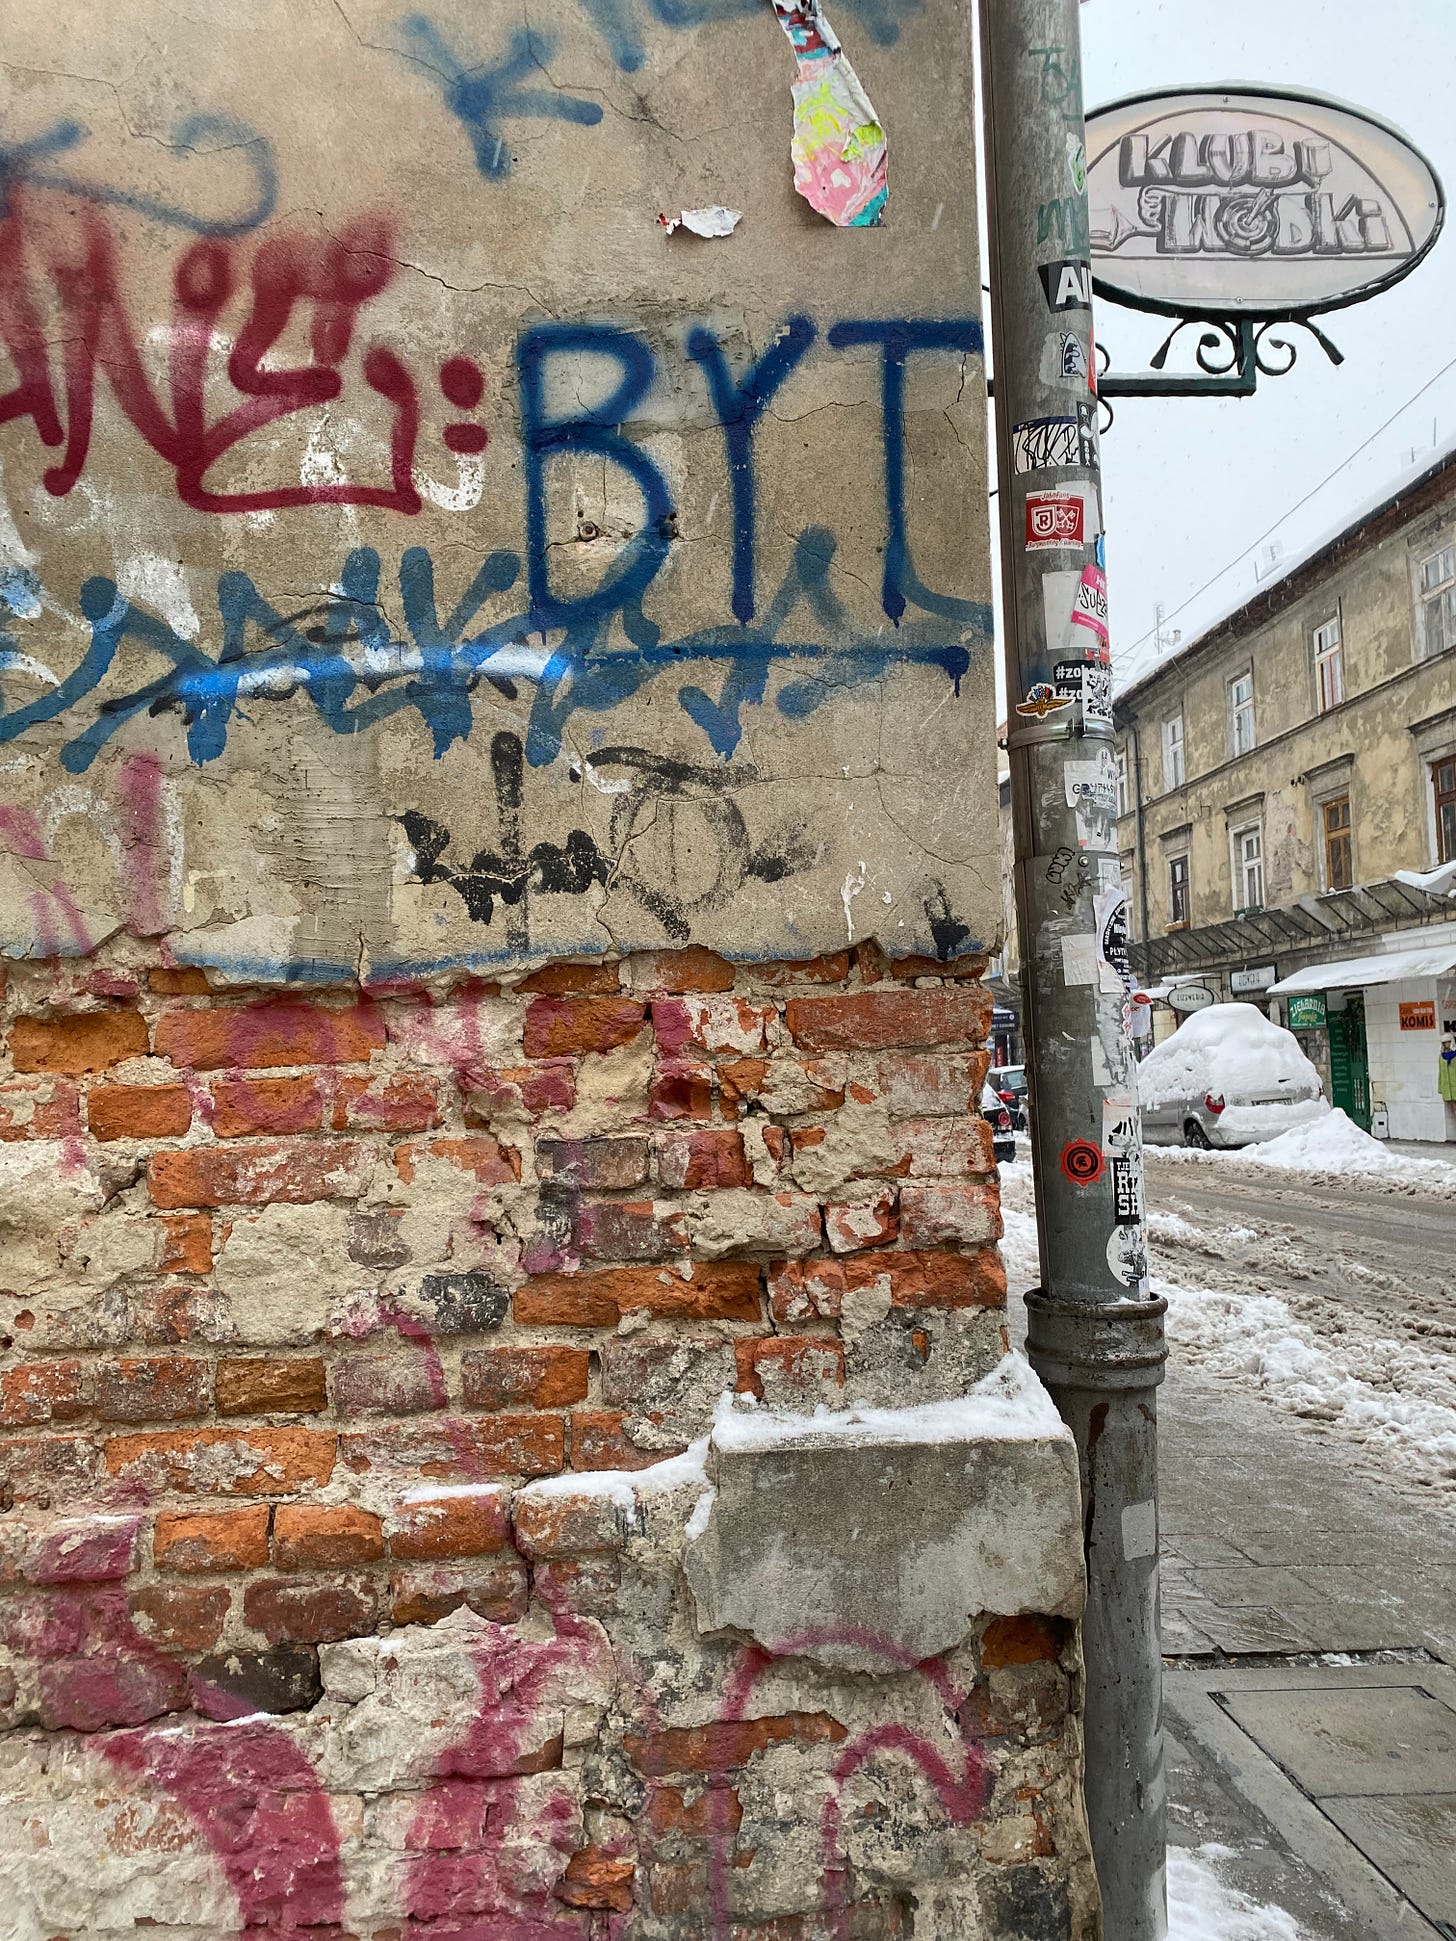 A graffitid urban wall. The pipe next to the wall is full of stickers. In the background, there is snow and ice everywhere.